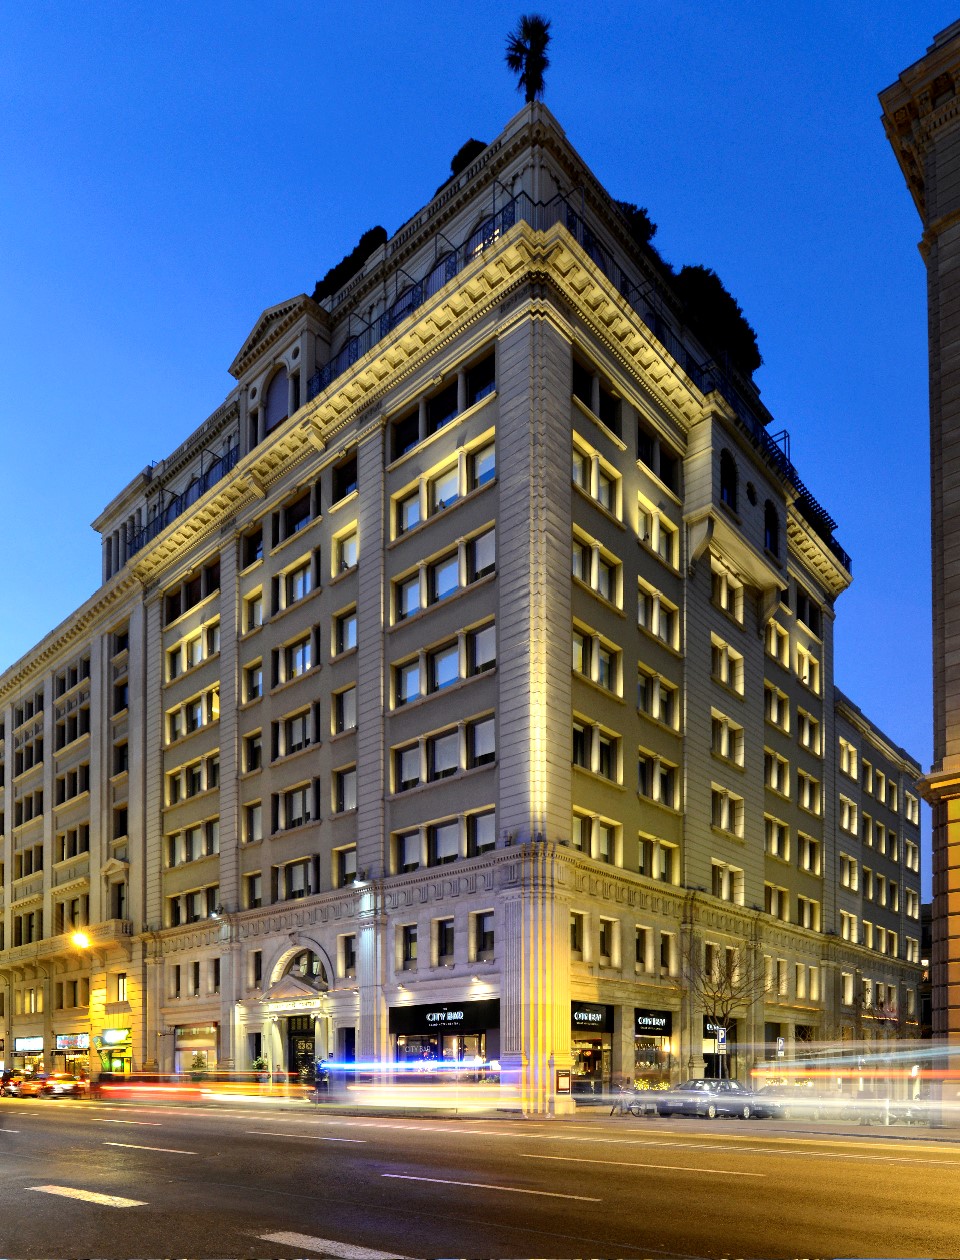 Barcelona’s Grand Hotel Central sold for €93M